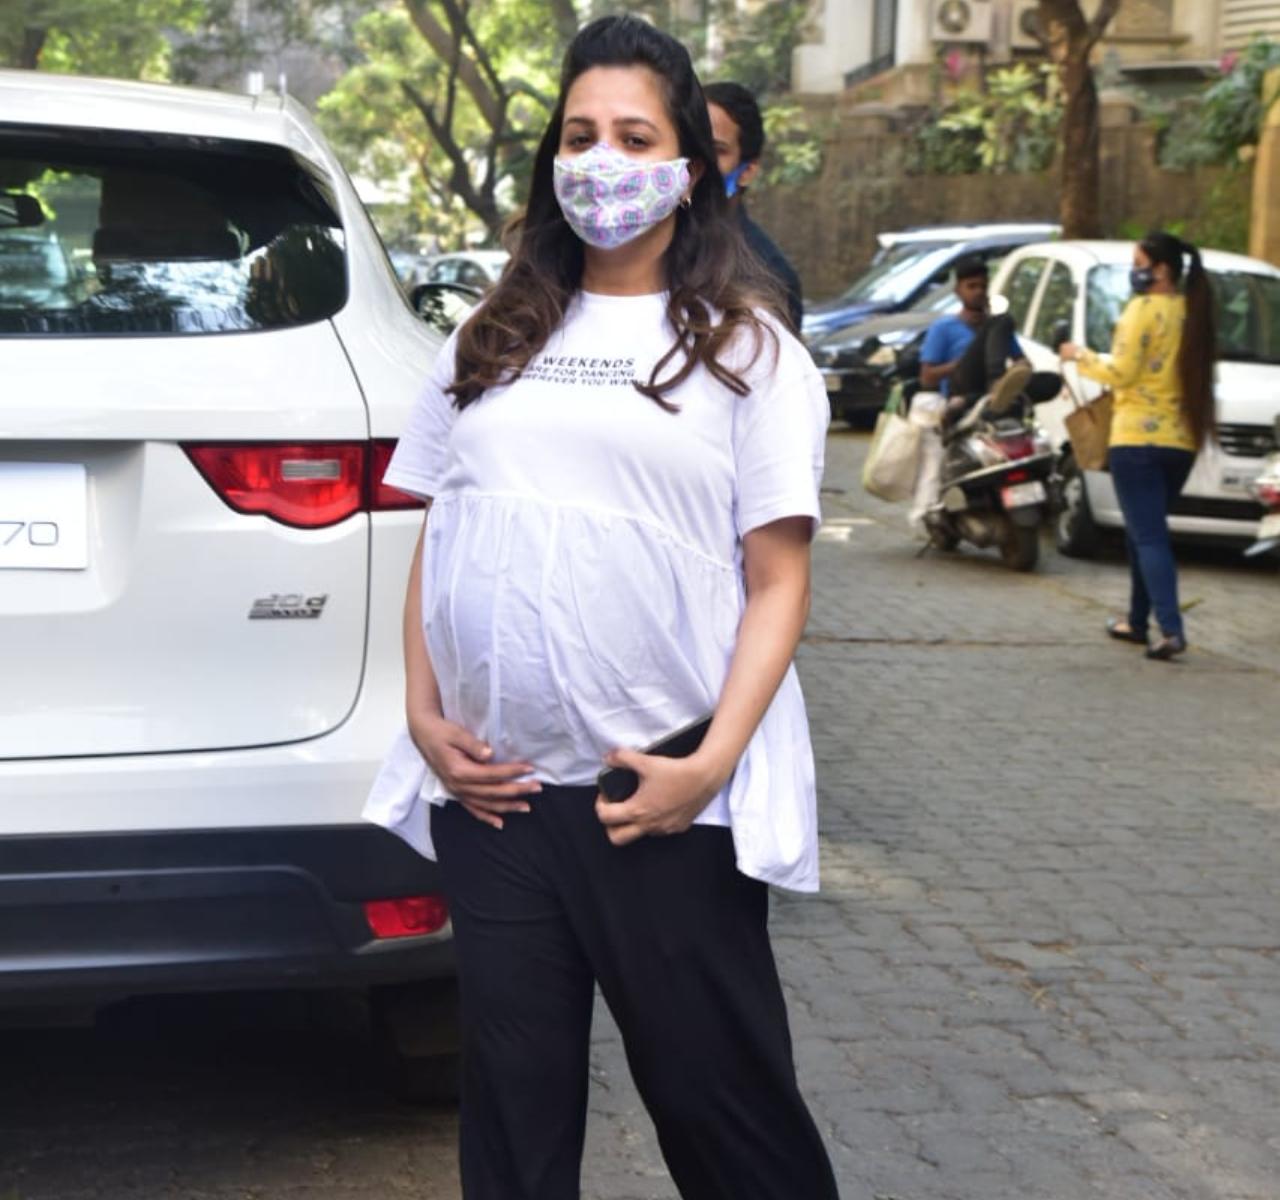 Anita Hassanandani was snapped with Rohit Reddy at a clinic in the city. The actress sported a pretty white outfit during the outing. Speaking of her hubby Rohit, the entrepreneur looked dapper in his casuals. (All pictures/Yogen Shah).